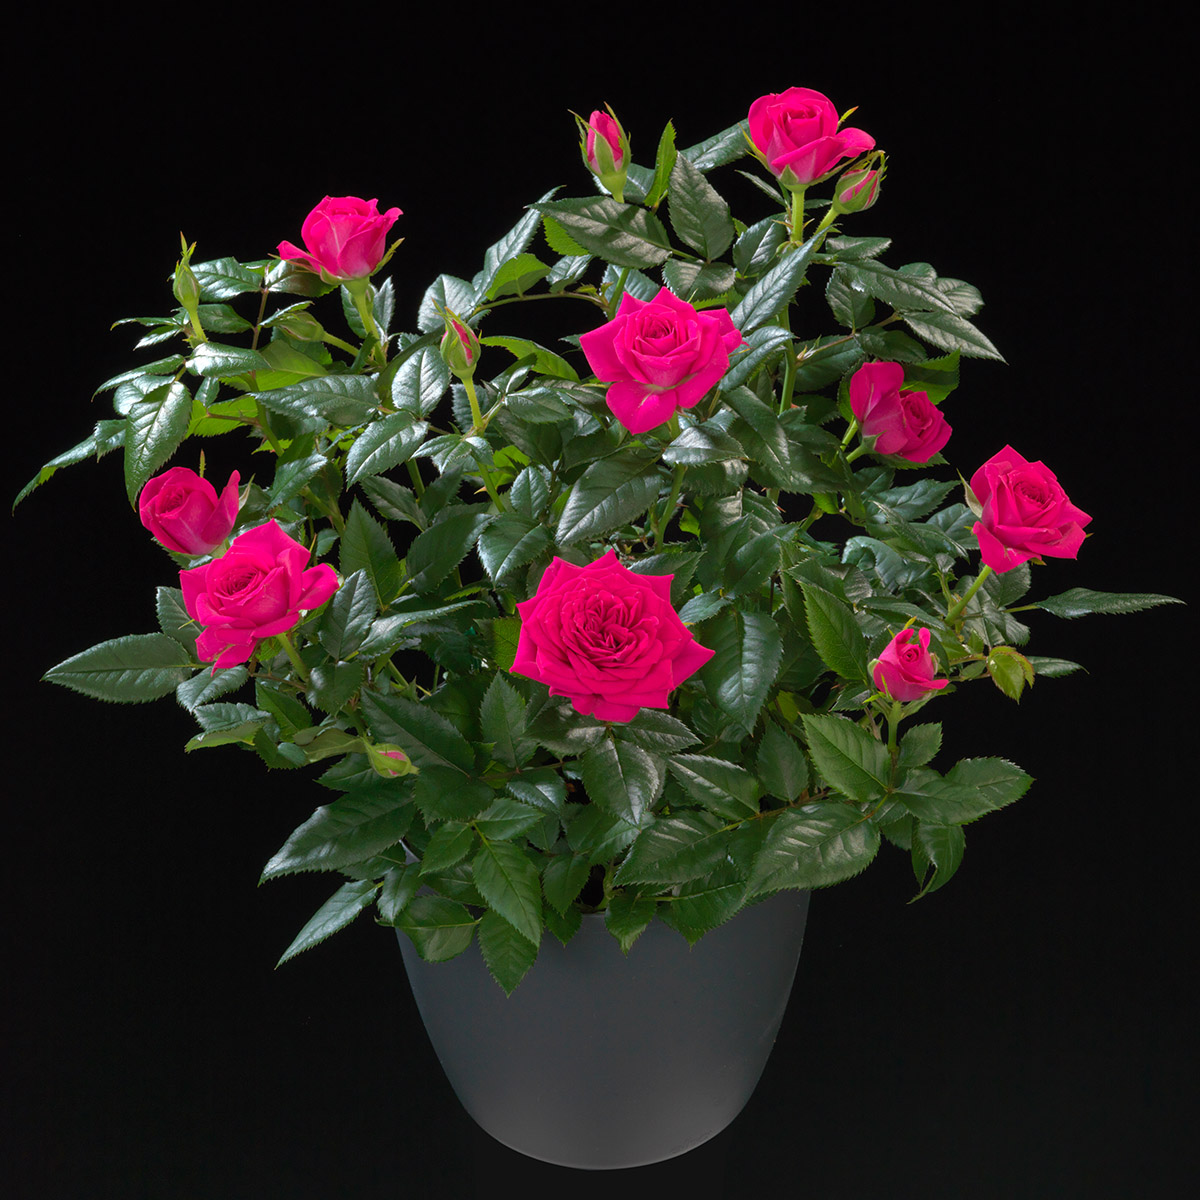 What Do Growers Think of Jewel Pot Roses From De Ruiter 42 Rose Violet Jewel